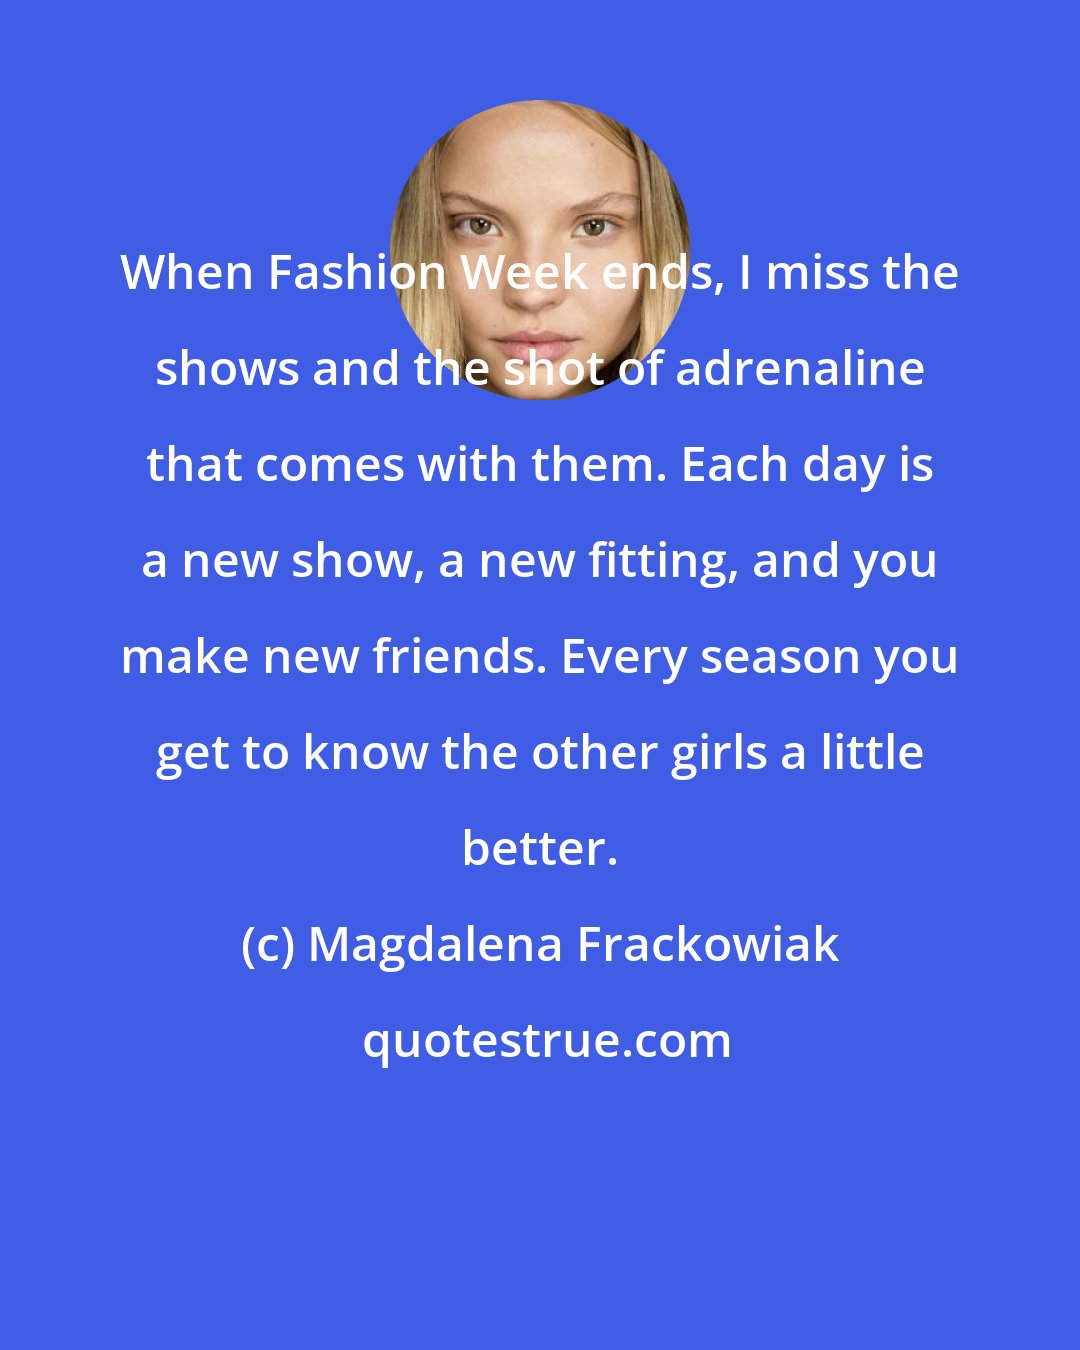 Magdalena Frackowiak: When Fashion Week ends, I miss the shows and the shot of adrenaline that comes with them. Each day is a new show, a new fitting, and you make new friends. Every season you get to know the other girls a little better.